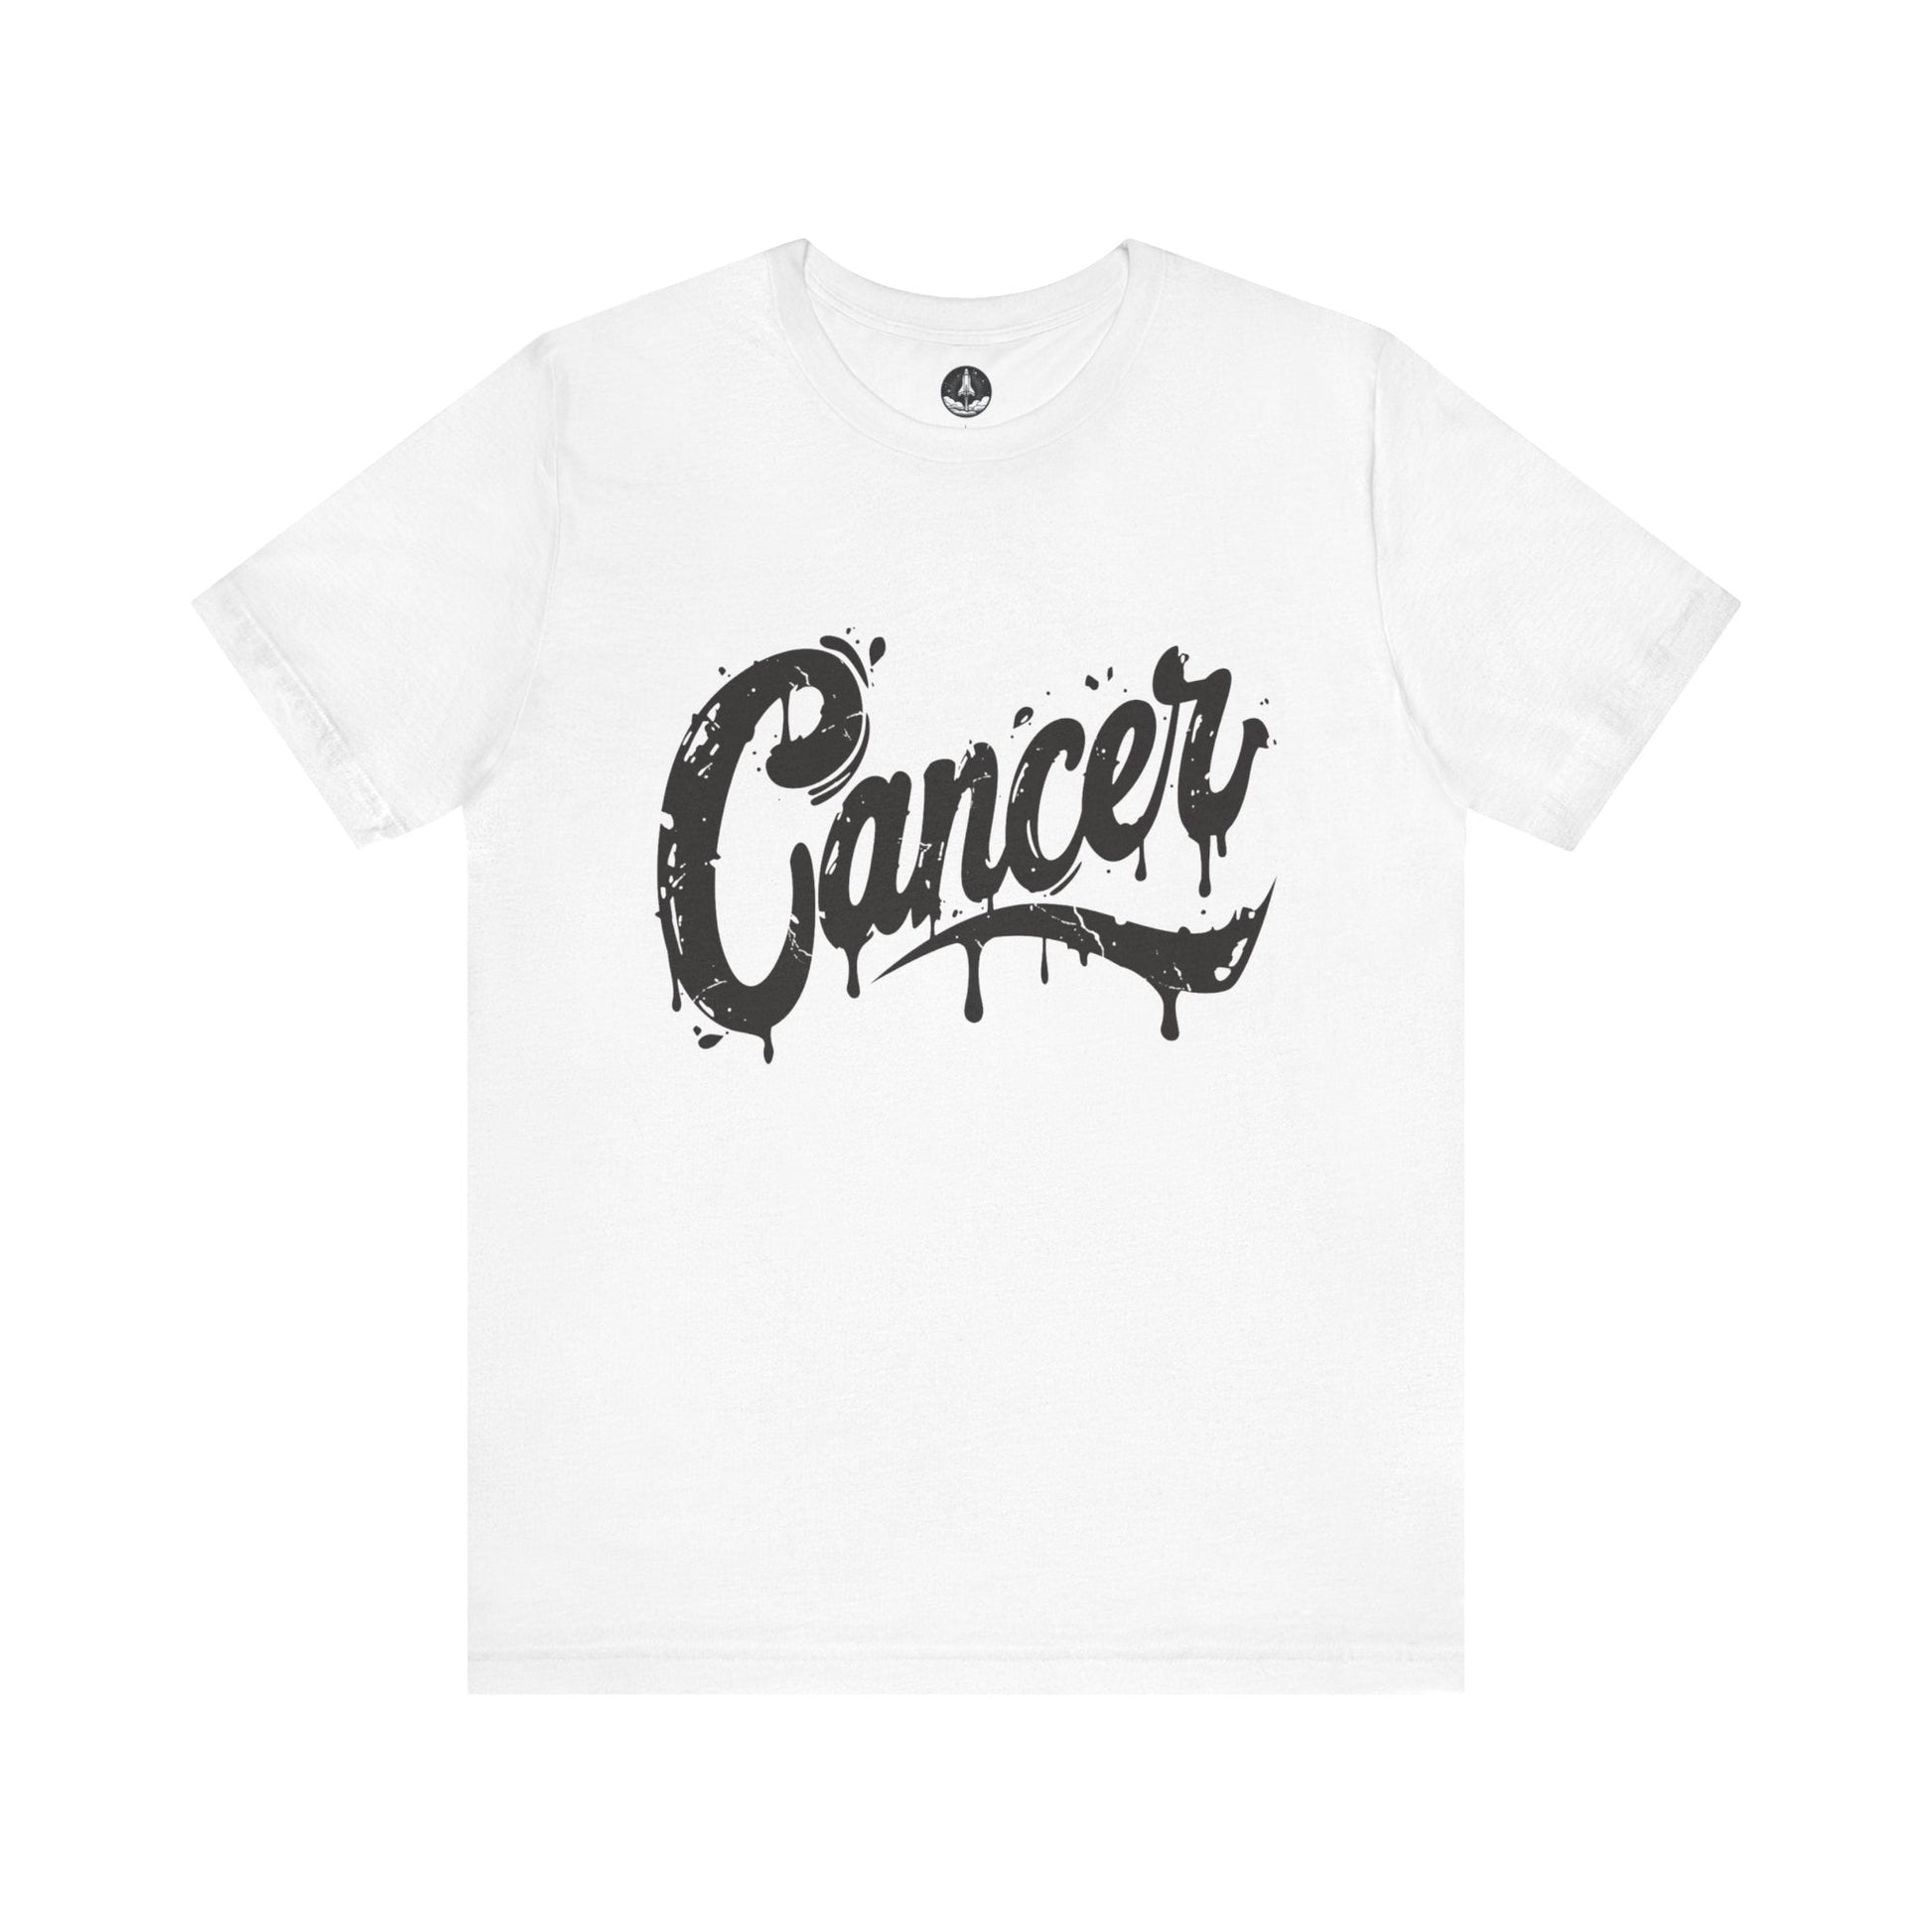 T-Shirt White / S Tidal Emotion Cancer TShirt: Flow with Feeling